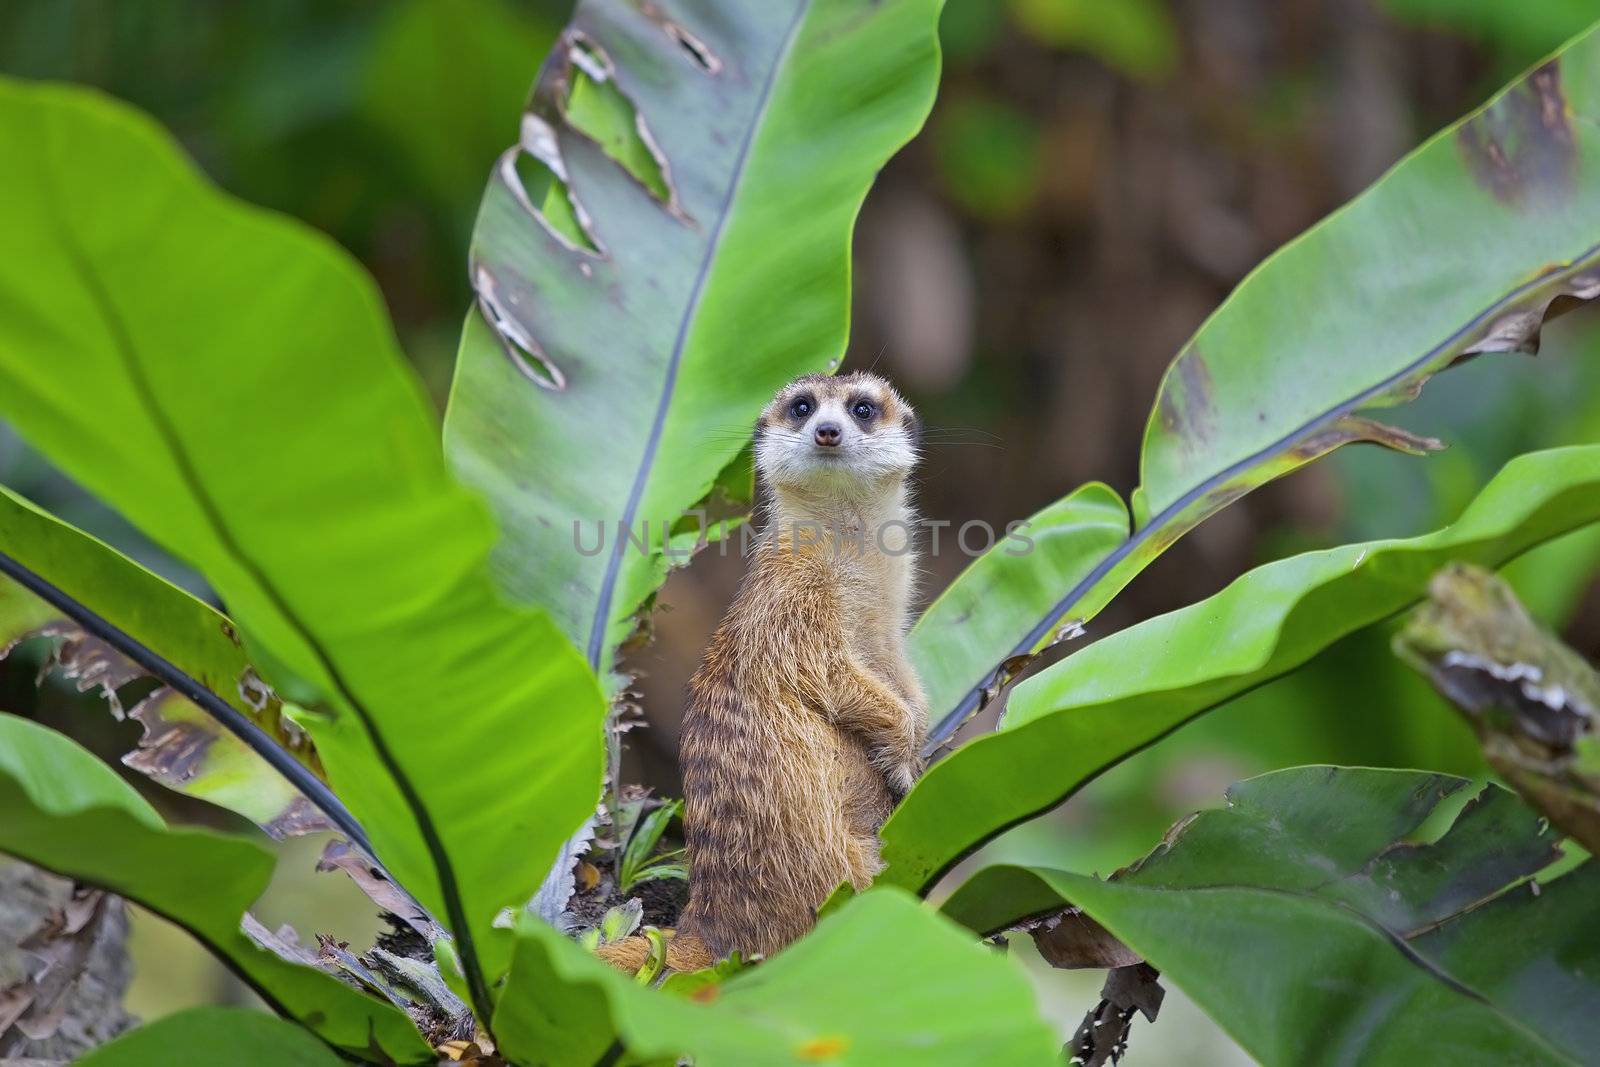 Meerkat standing in the middle of a green plant